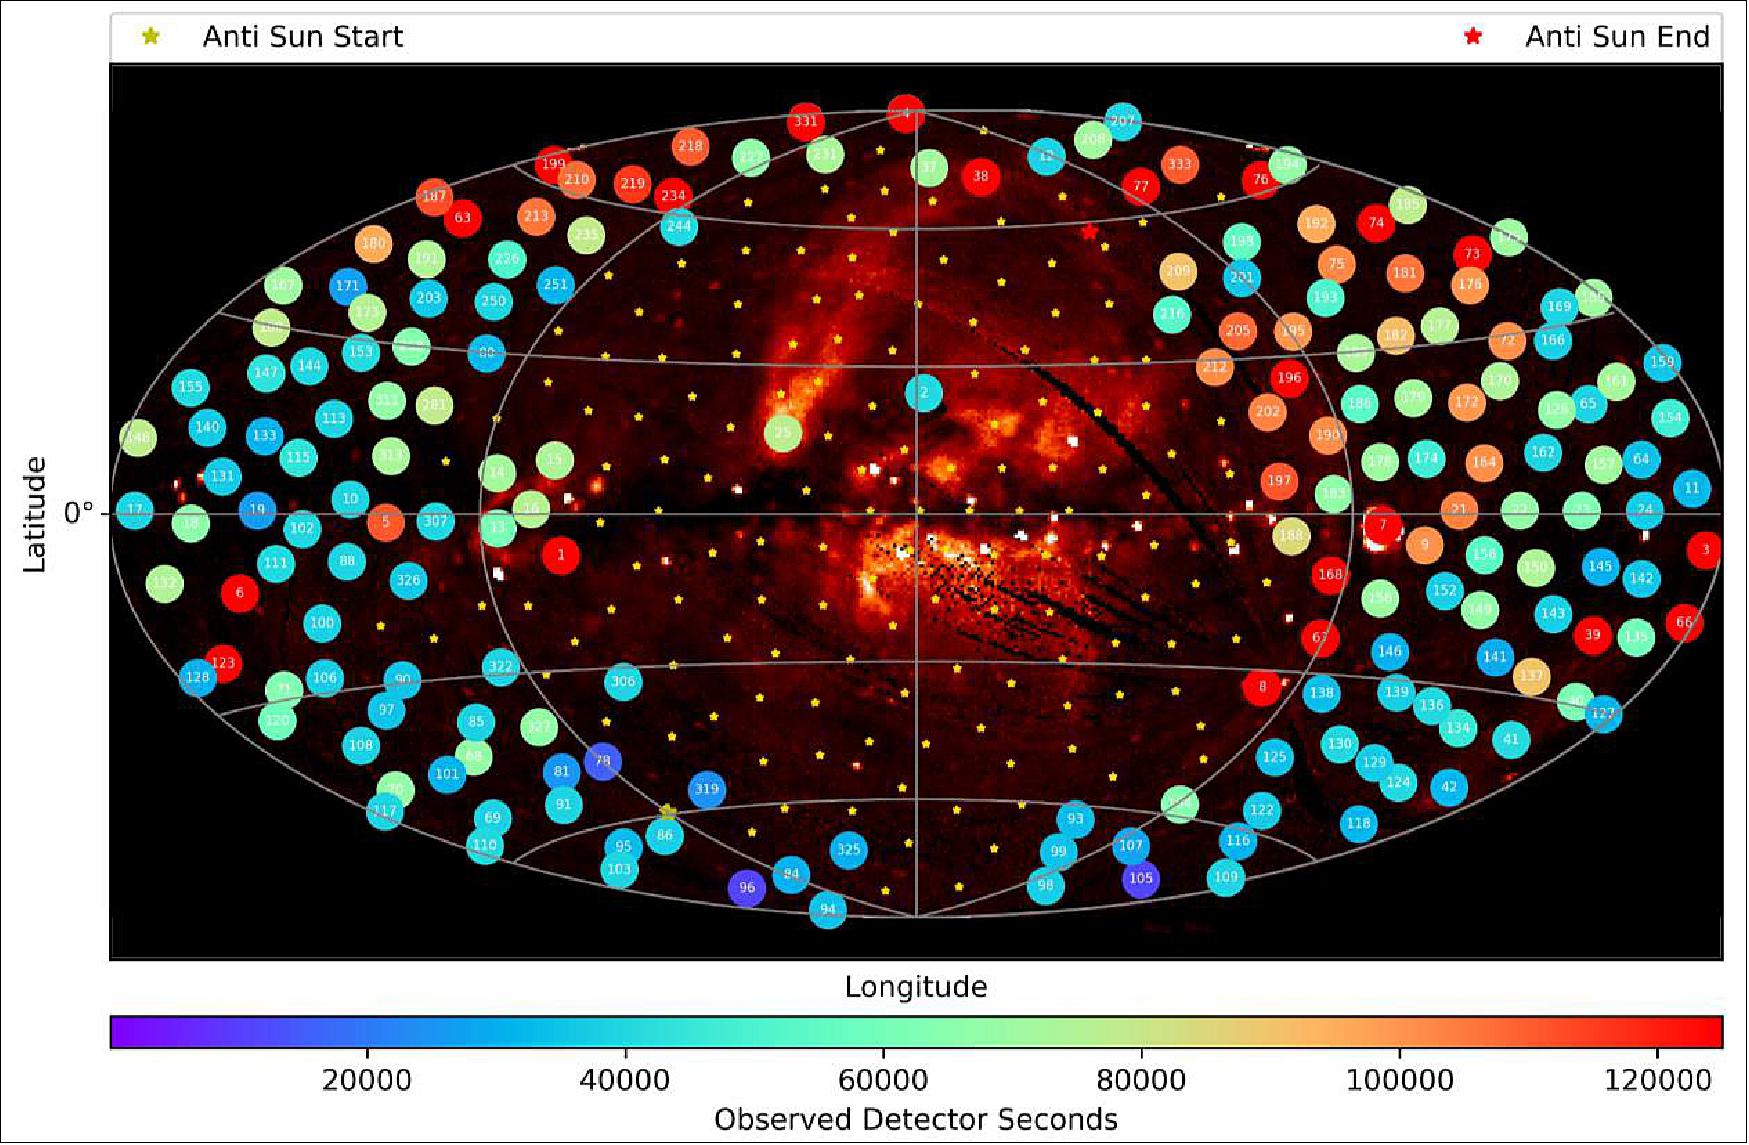 Figure 16: Observations obtained to date with HaloSat. Fields already observed are shown as circles (smaller than the field of view) with color indicating the total exposure obtained. Stars mark fields that have not yet been observed. The plot is in Galactic coordinates with the center of the Milky Way at the center and Galactic North towards the top. The image is a map of diffuse soft X-ray emission from the ROSAT observatory (image credit: HaloSat Team) 21)